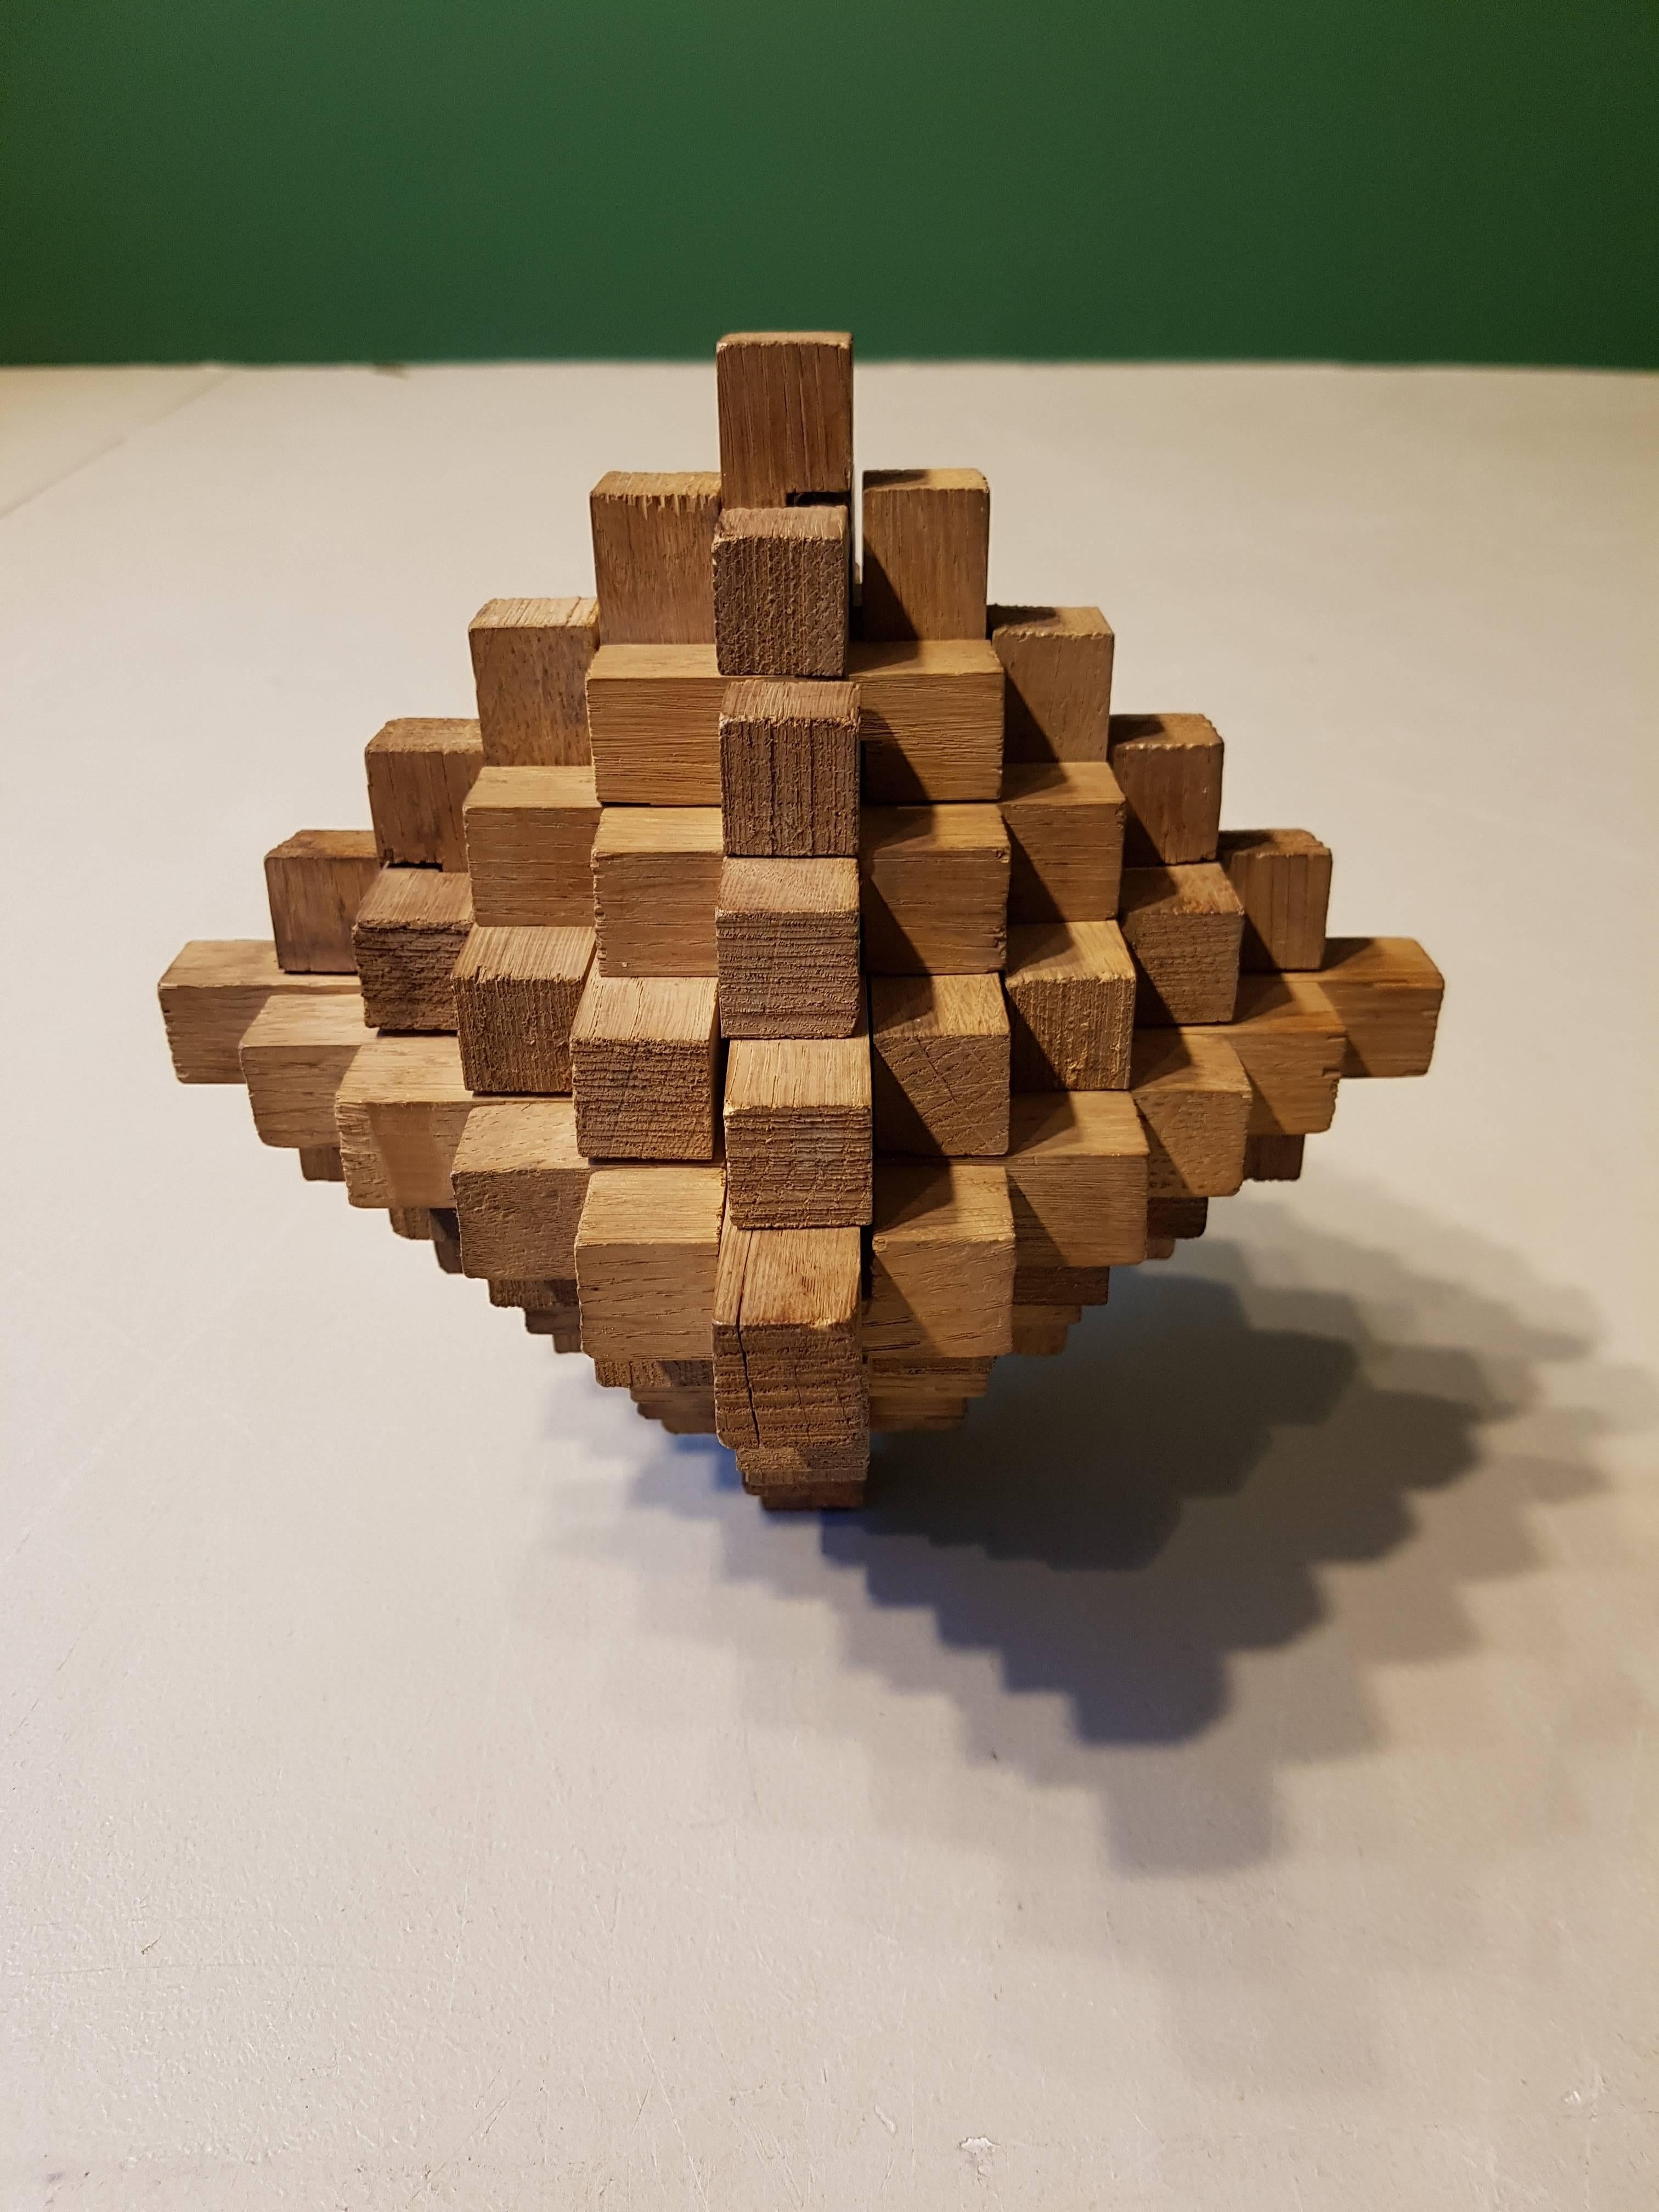 20th century French geometric sculpture made of oak.